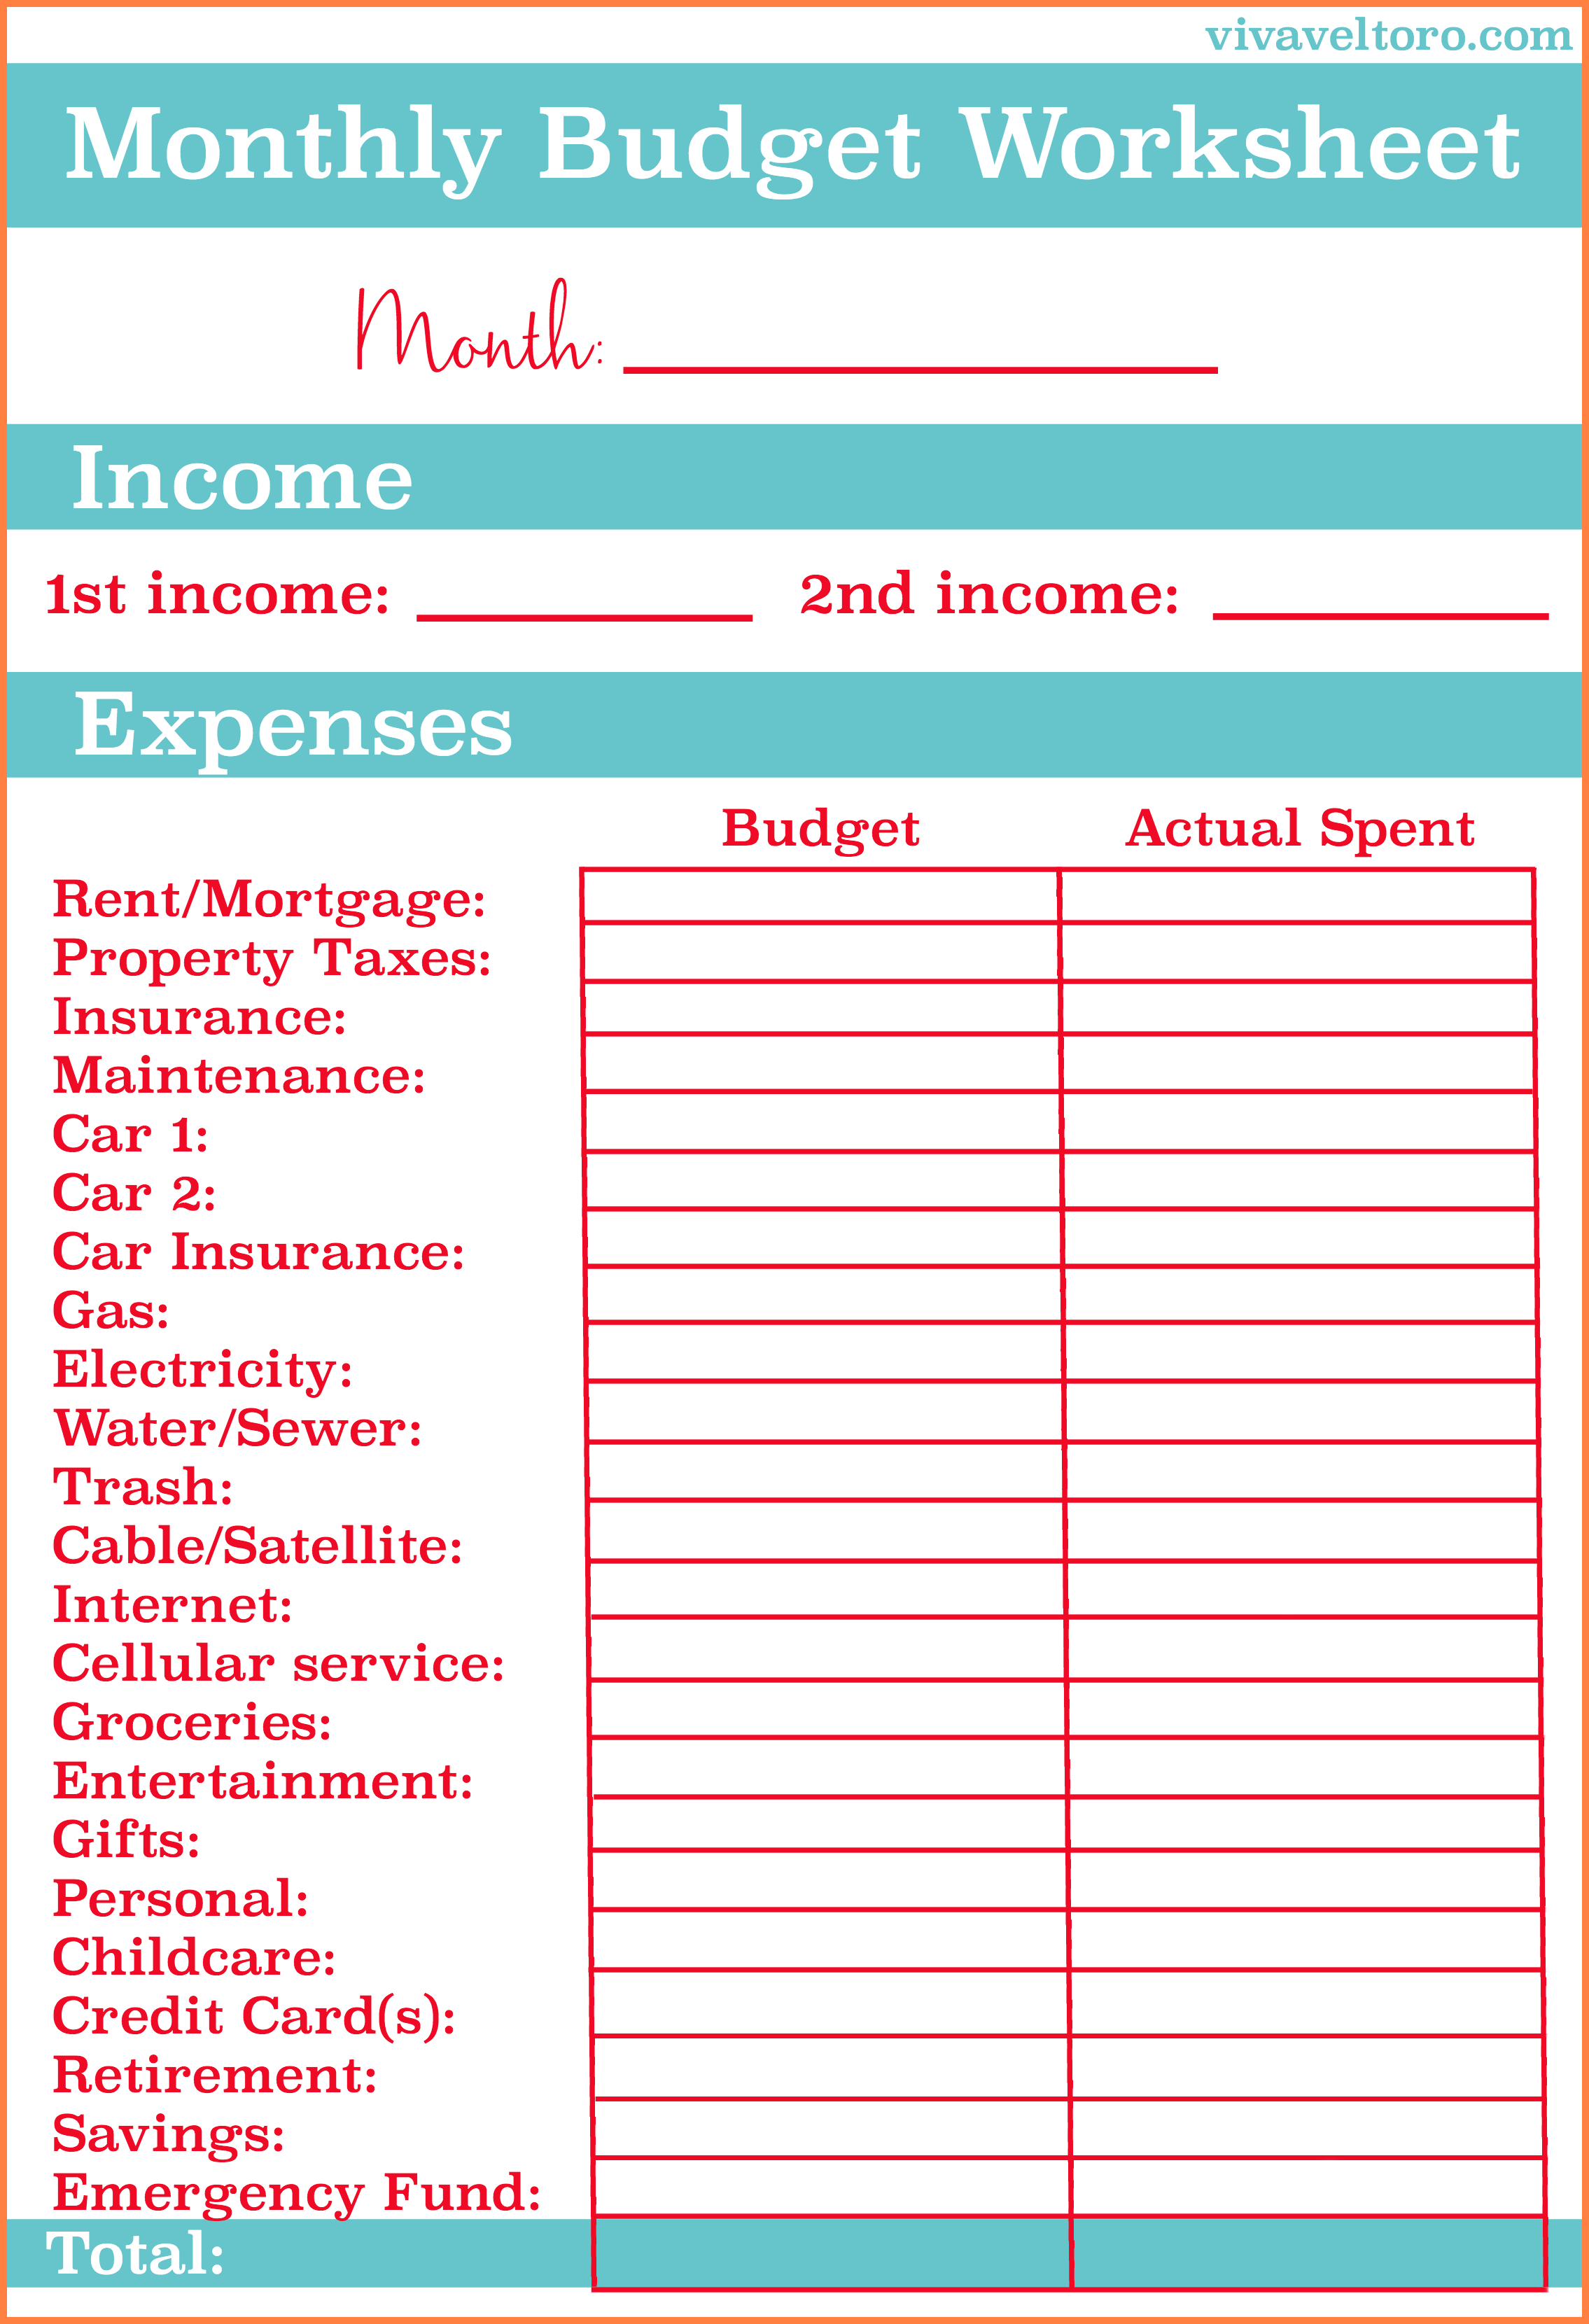 sample budget sheet for single person